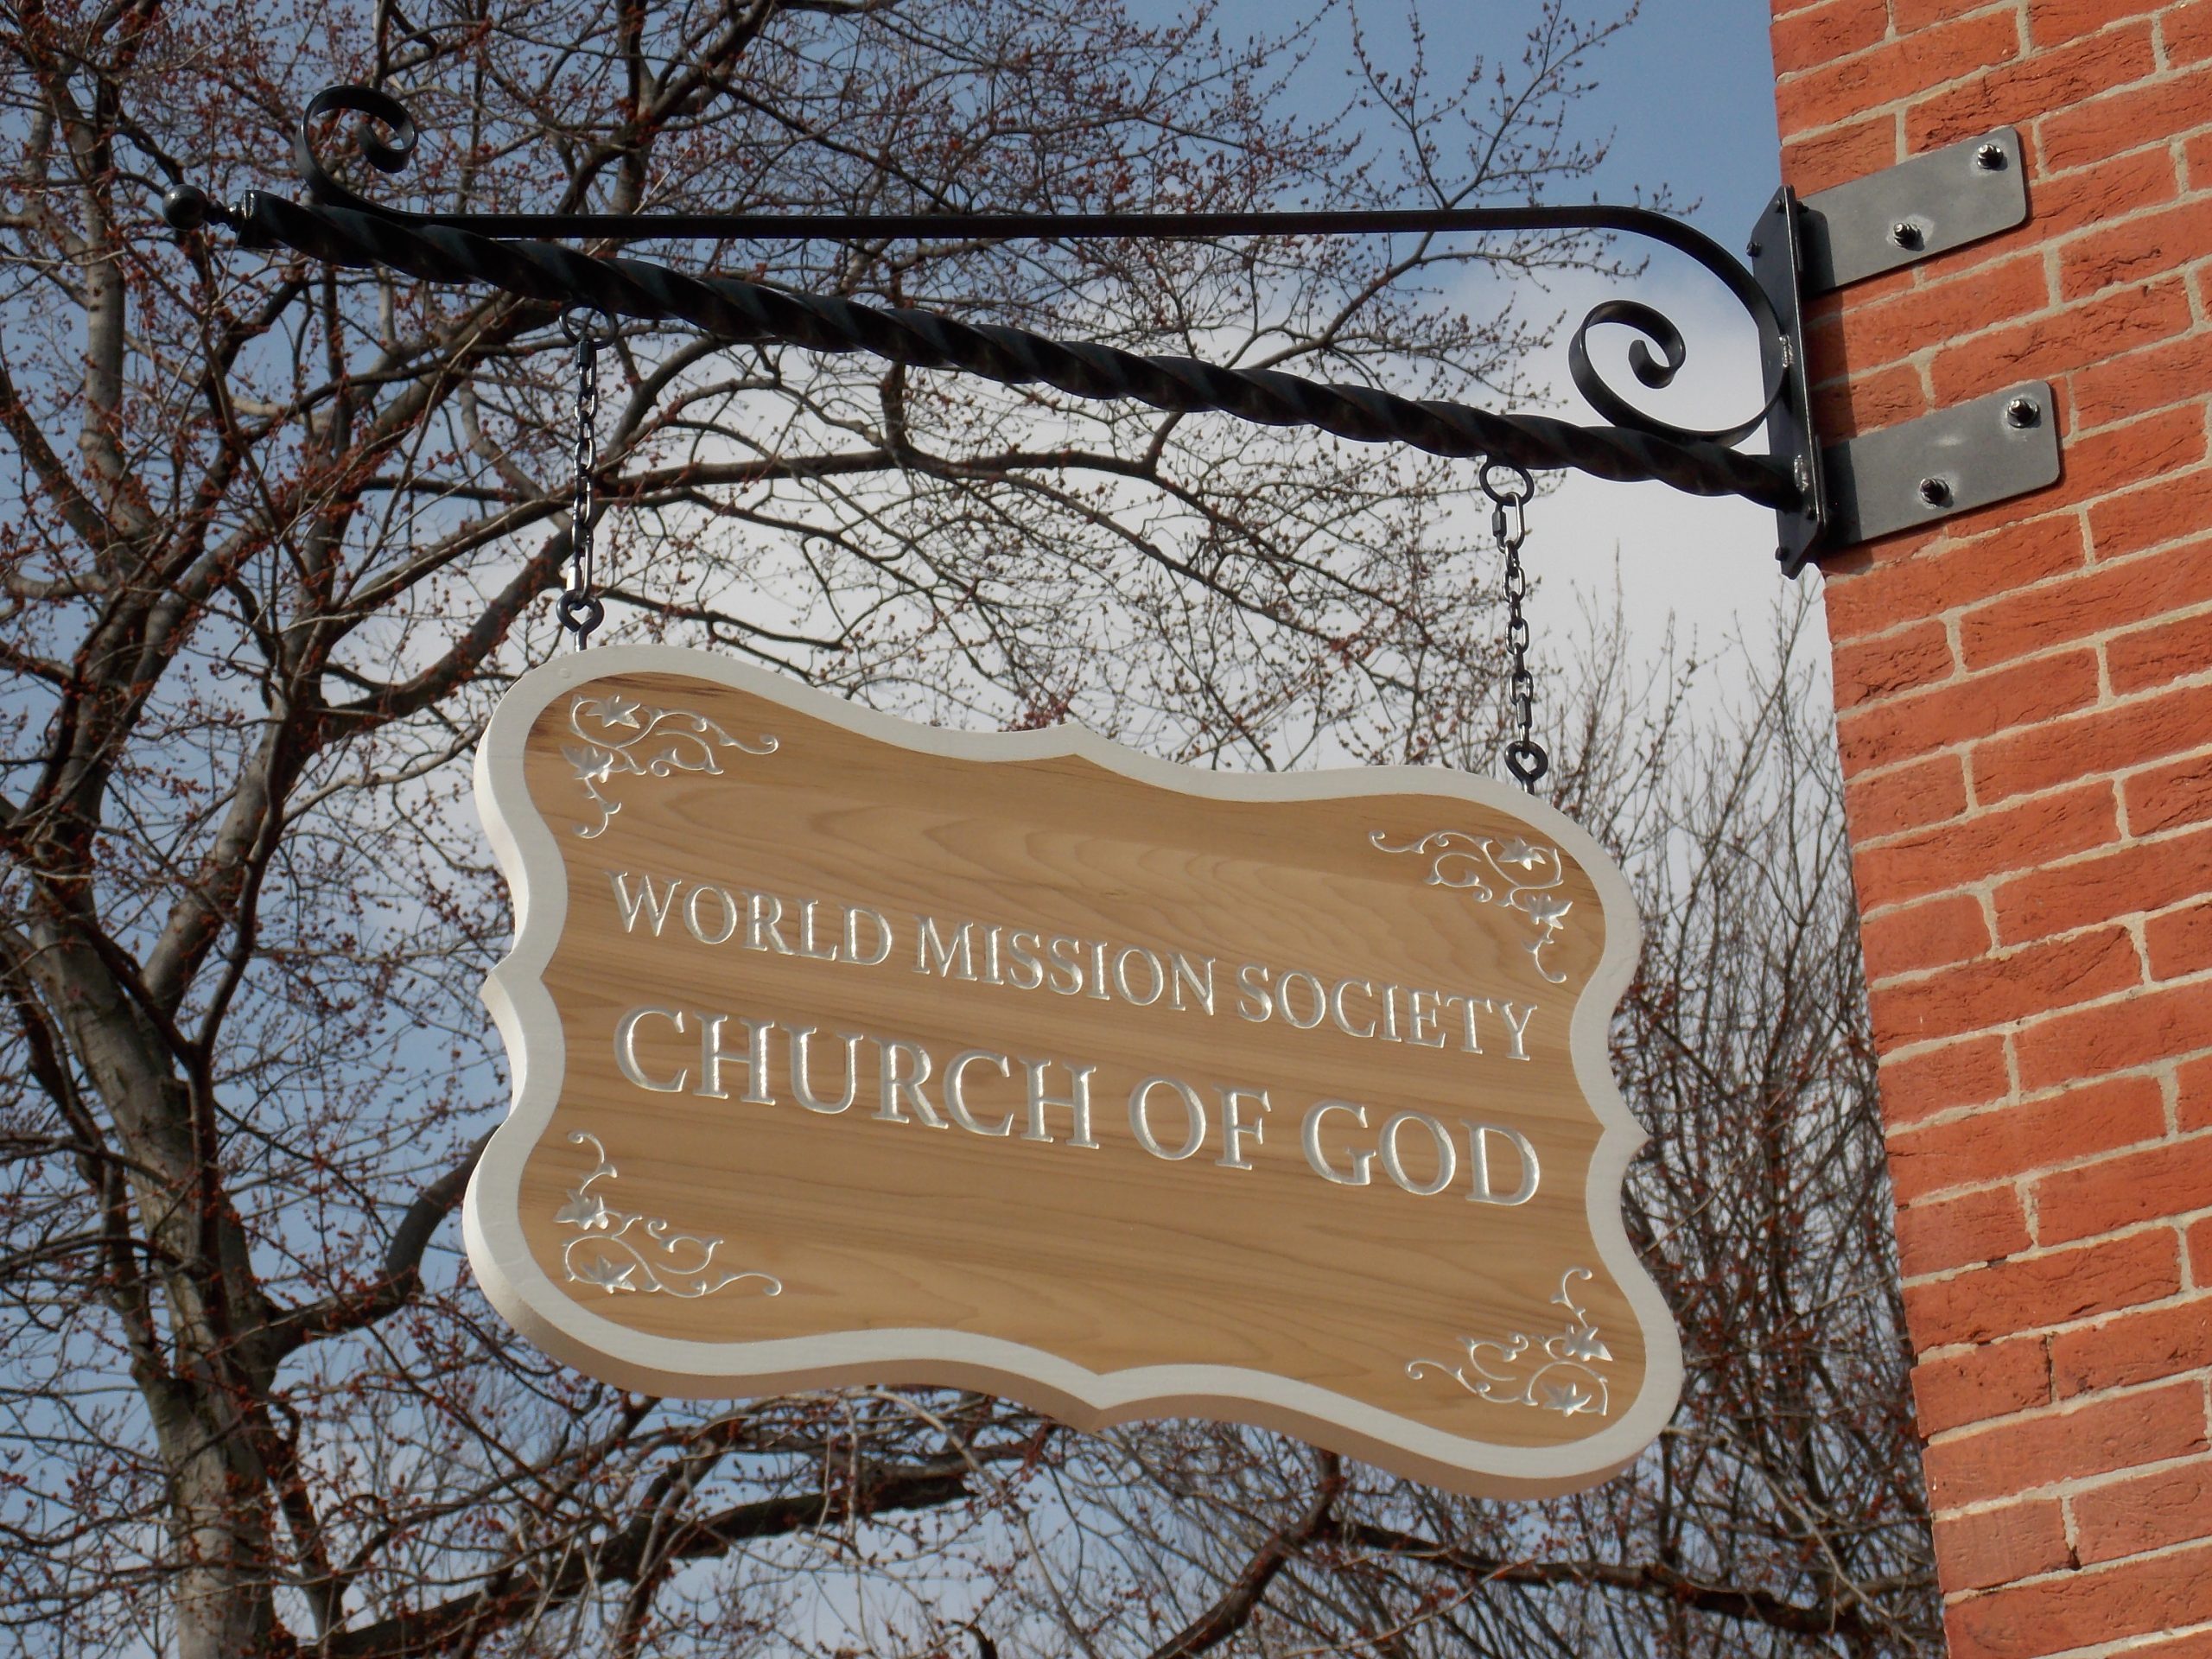 A sign for the World Mission Society Curch of God hanging on a building